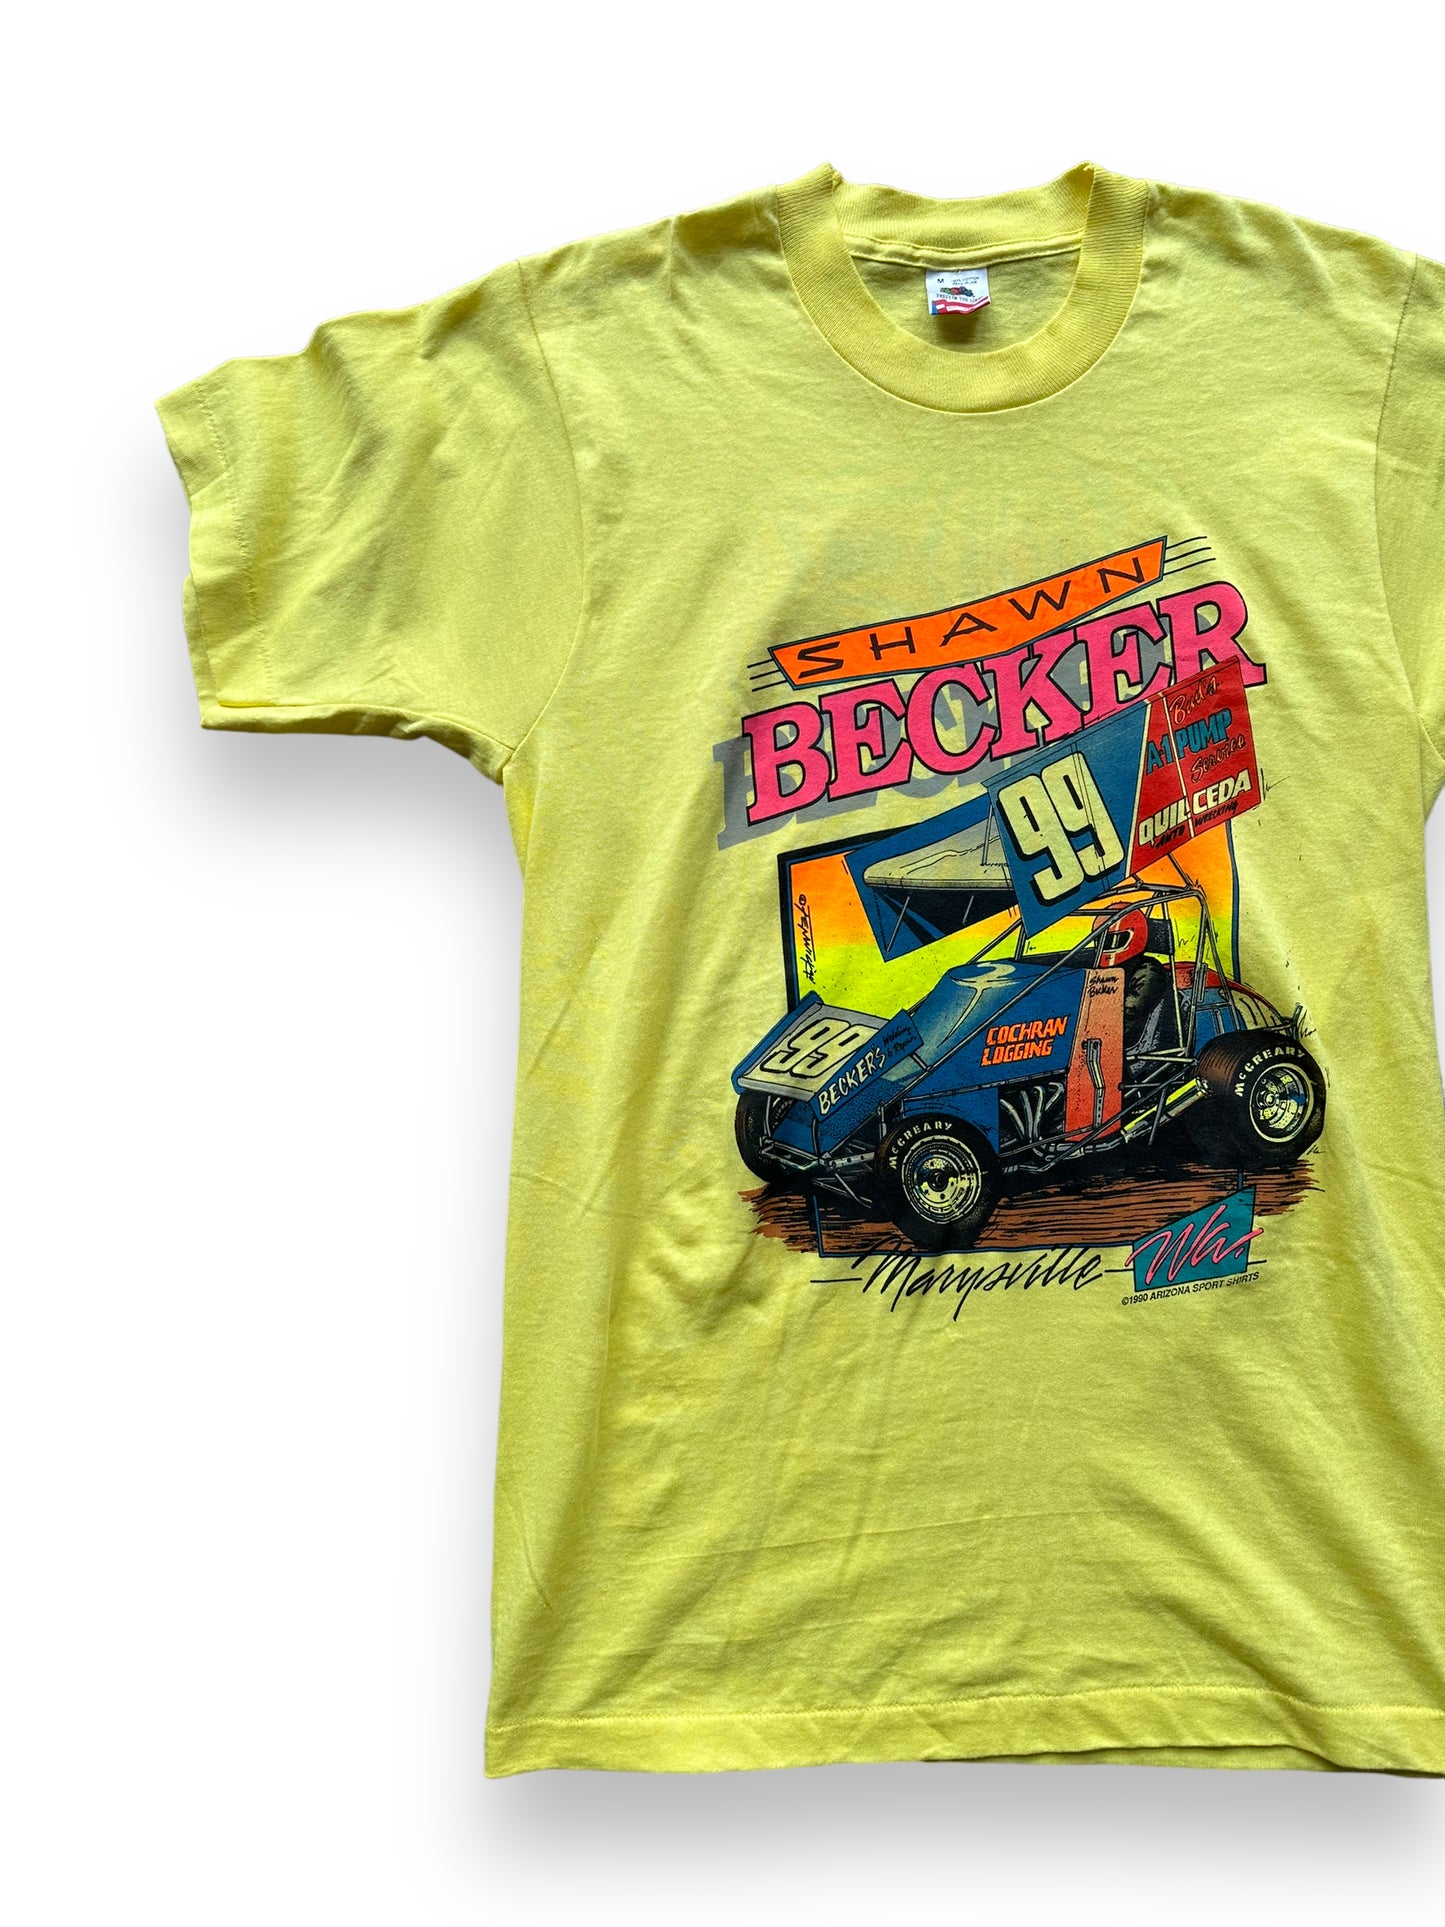 Front right of Vintage Shawn Becker #99 Racing Tee SZ M |  Vintage Auto Tee Seattle | Barn Owl Vintage